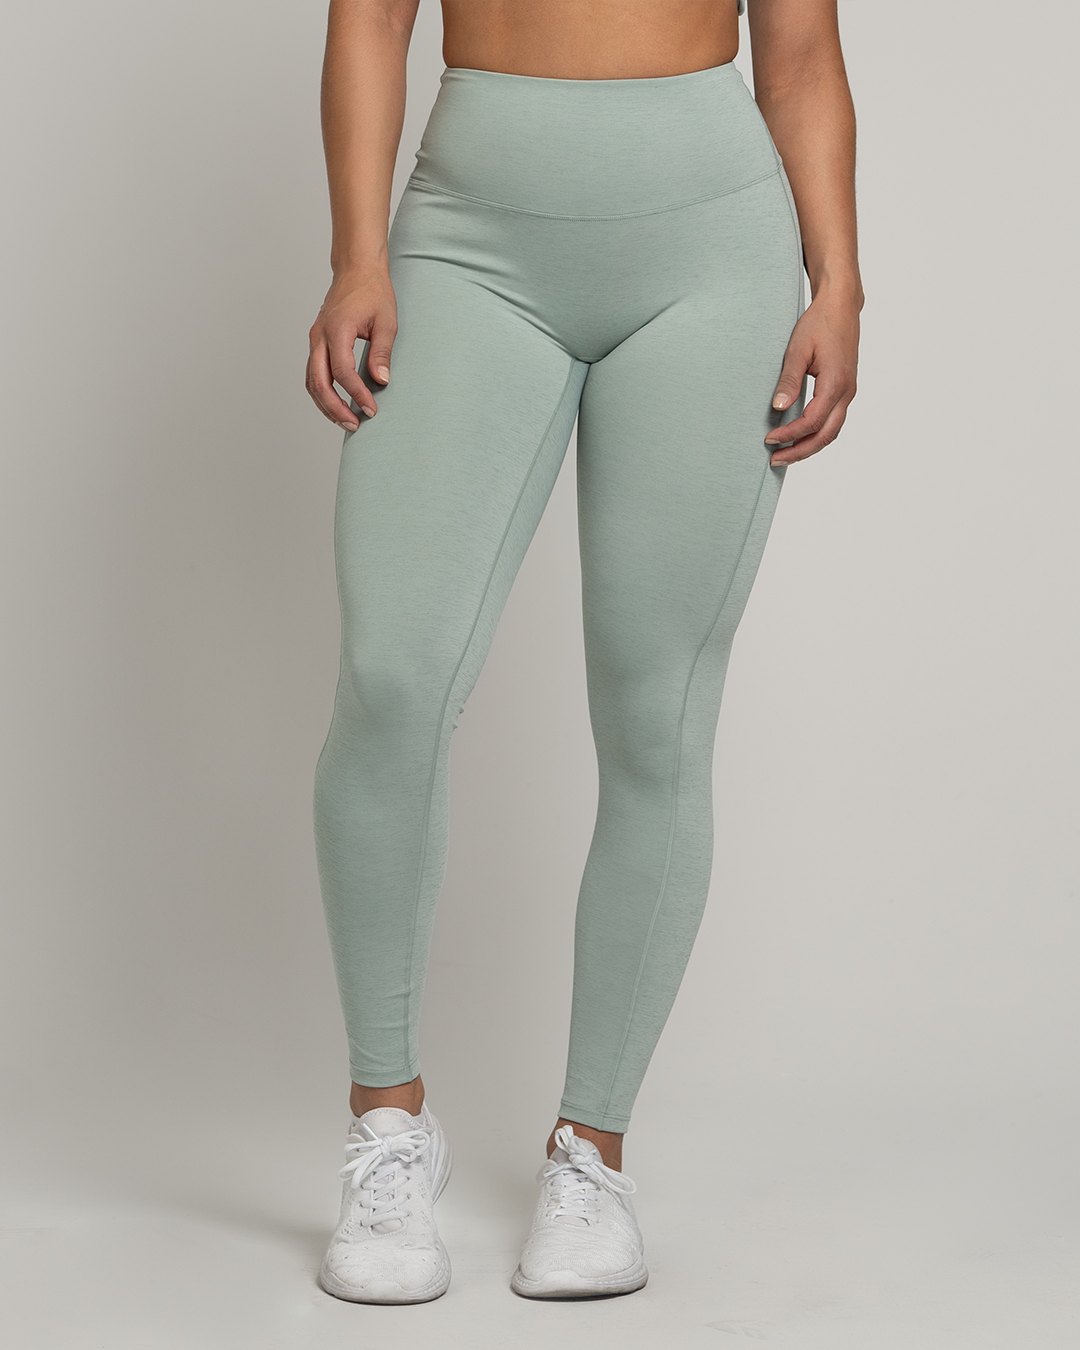 Get Going Sage Green 7/8 Leggings – Shop the Mint